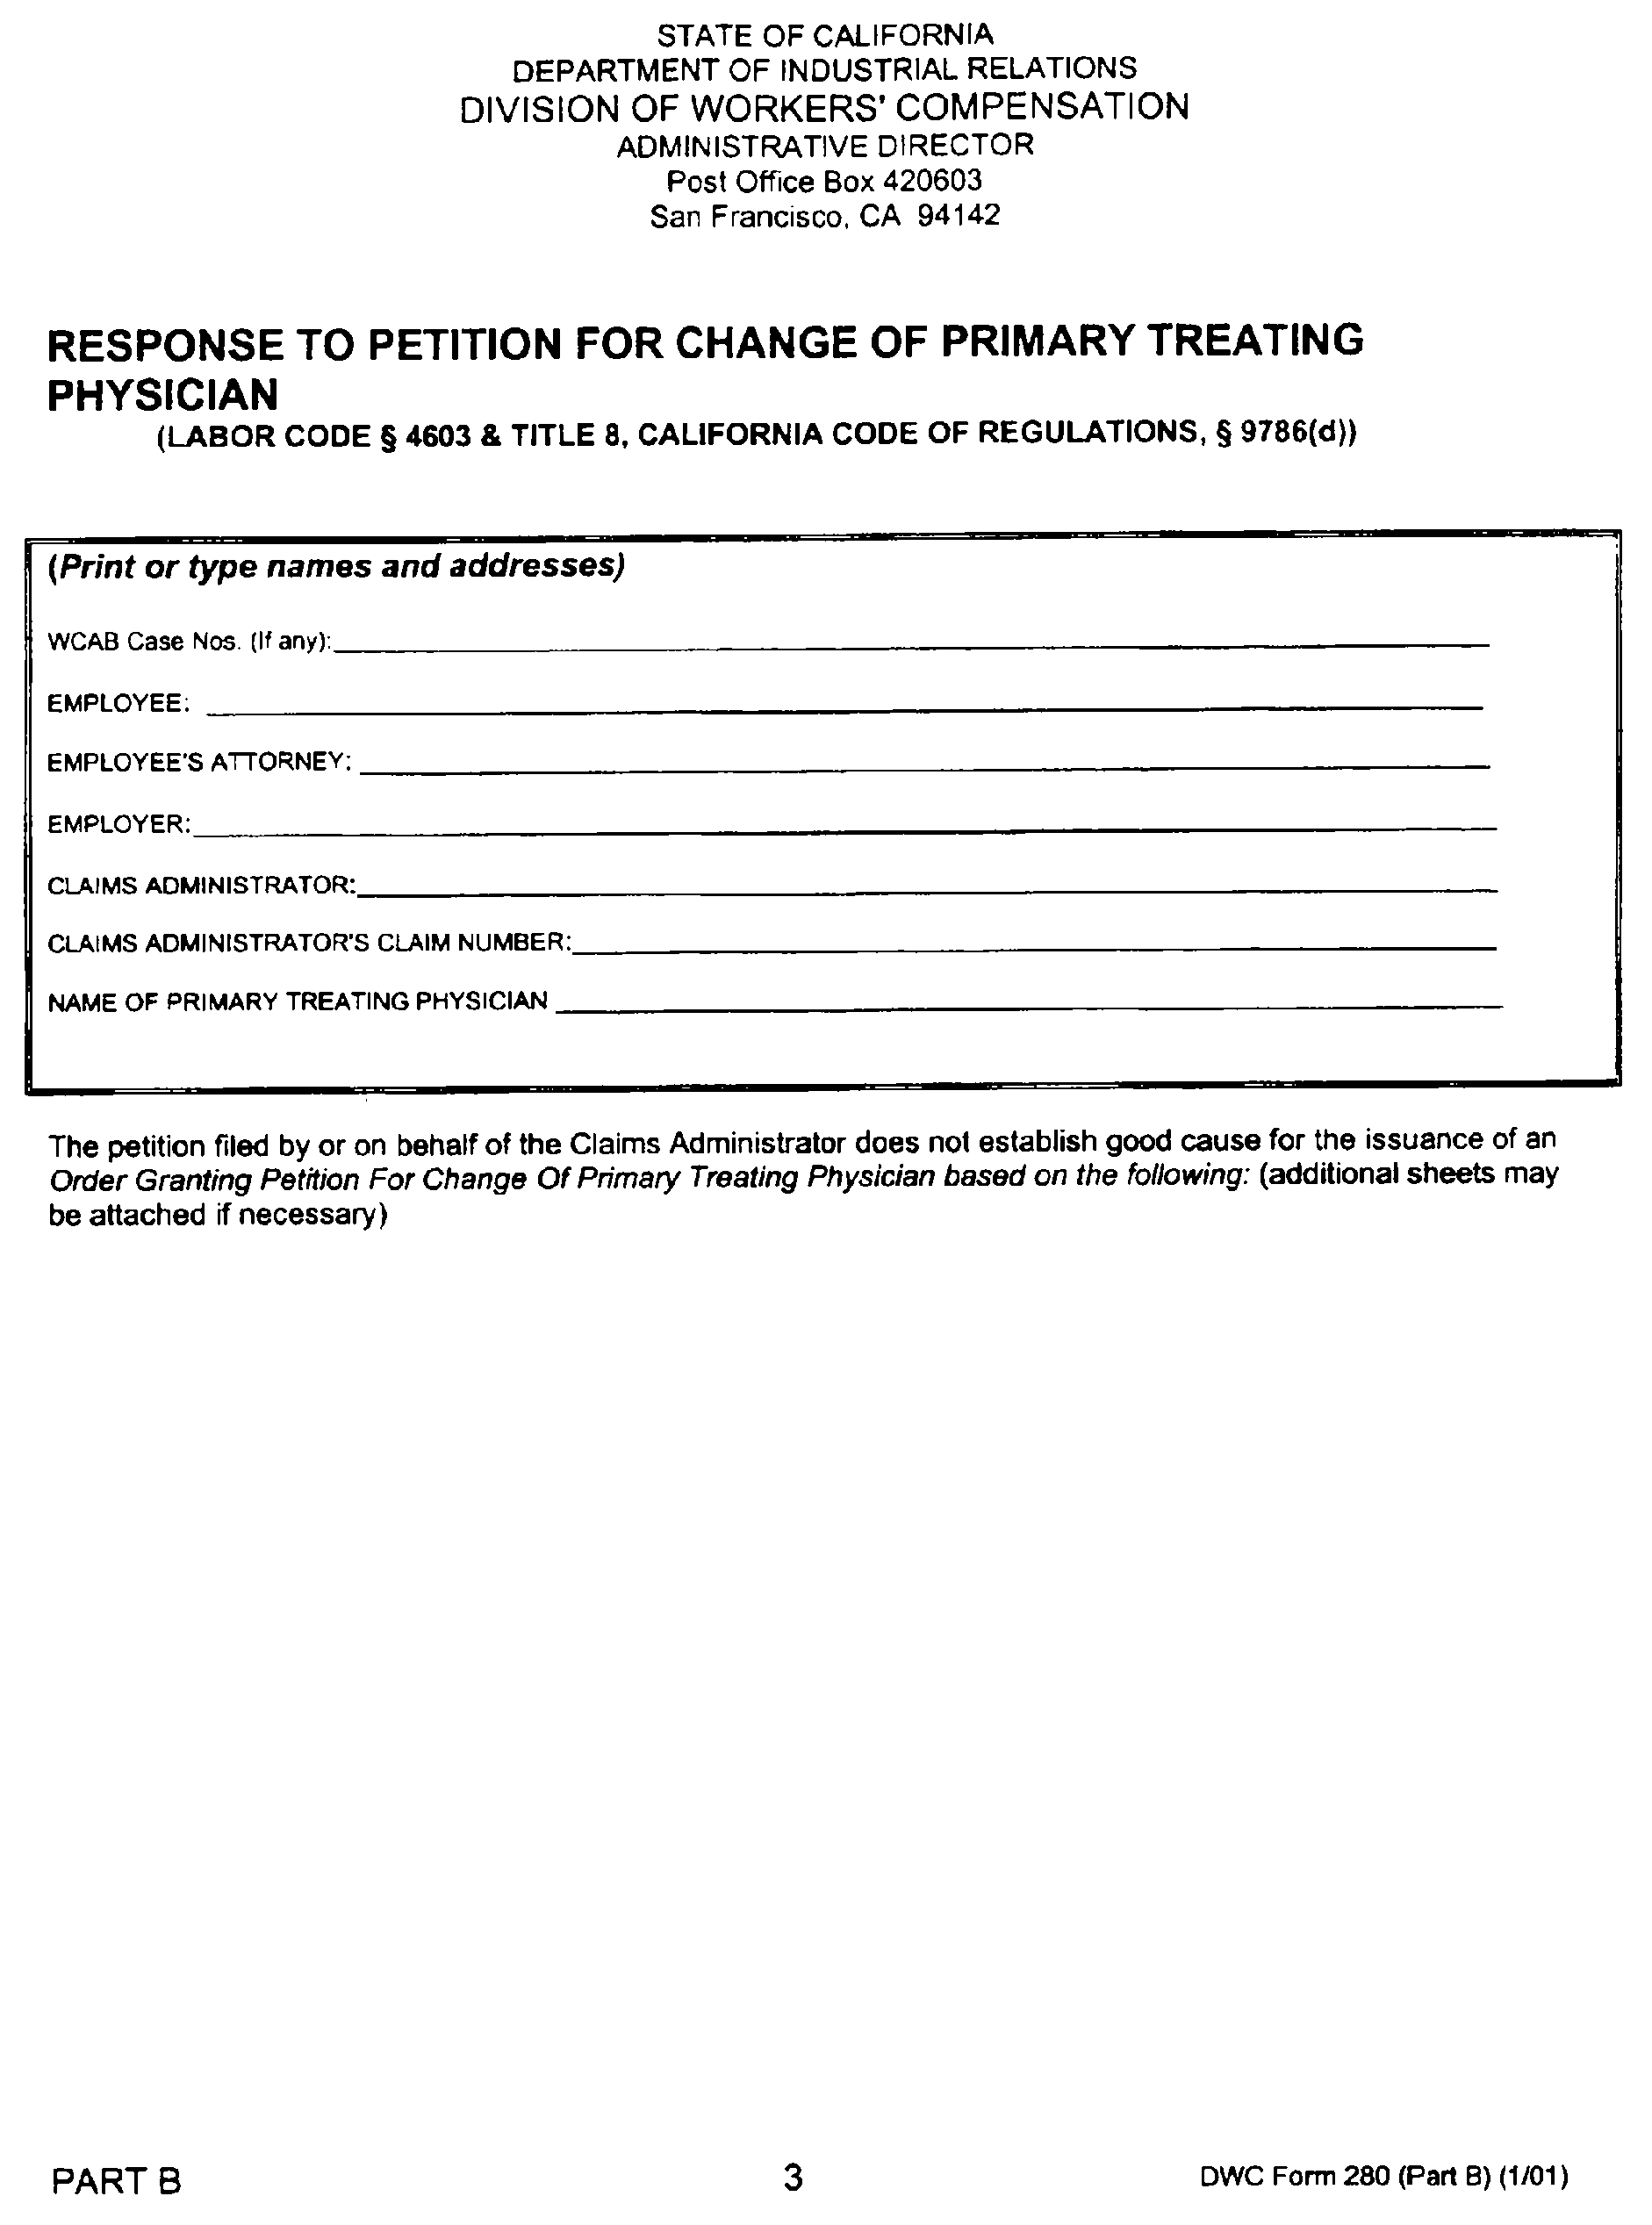 Image 3 within § 9786.1. Petition for Change of Primary Treating Physician; Response to Petition for Change of Primary Treating Physician (DWC Form 280 (Parts A and B)).